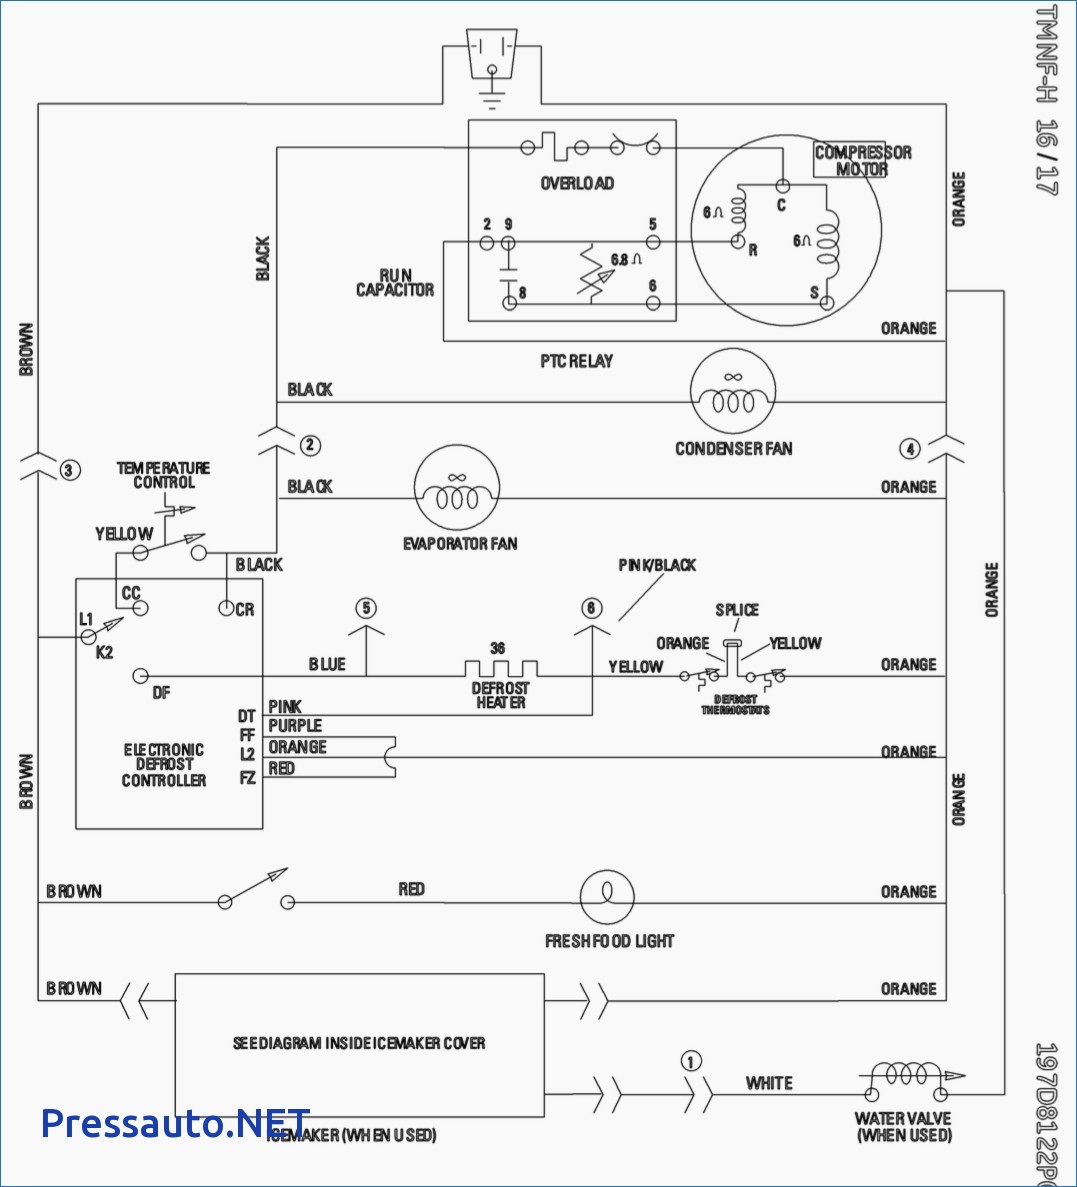 Diagrams Whirlpool Refrigerator Wiring Diagram Thoughtexpansion Also